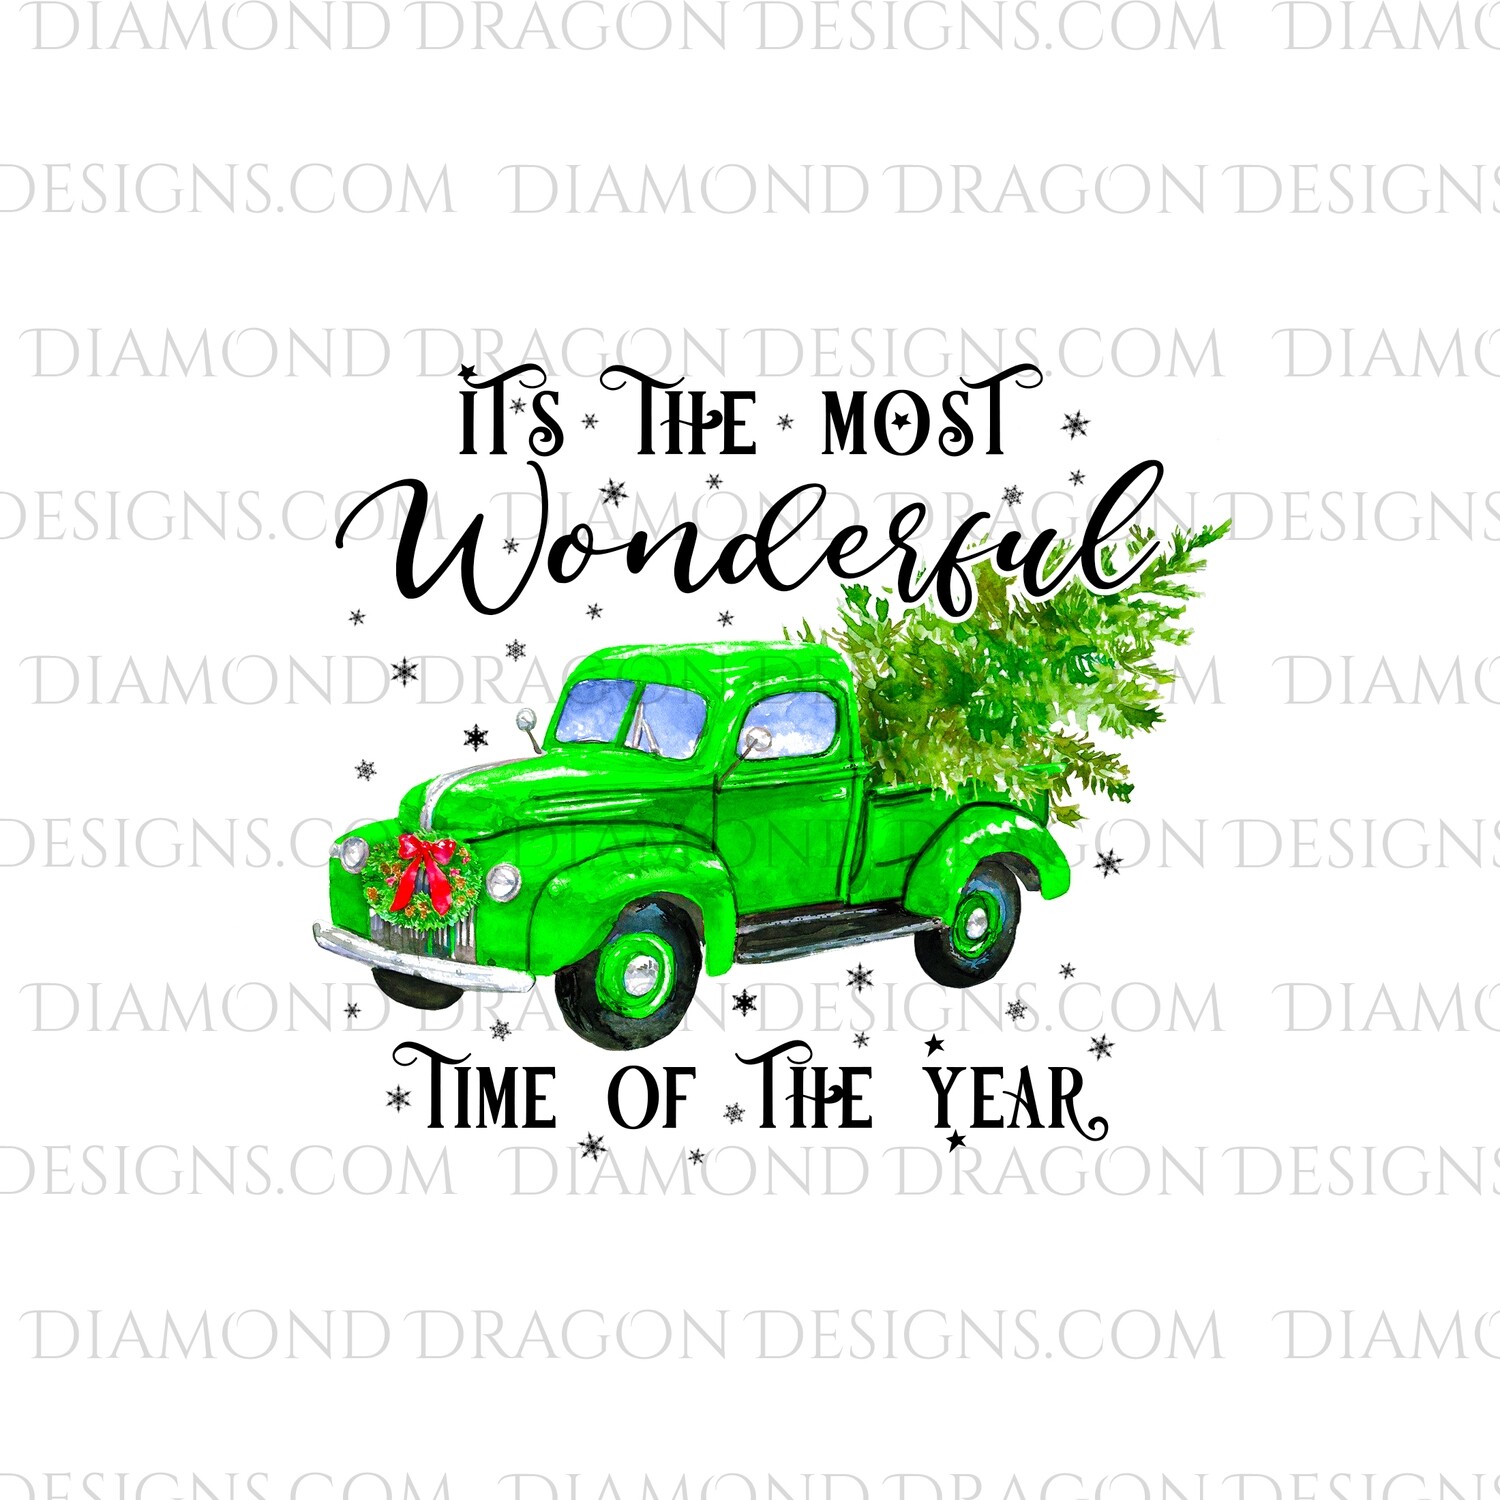 Christmas - Green Truck, Christmas Tree, It’s the most wonderful time, Green Vintage Truck, Waterslide